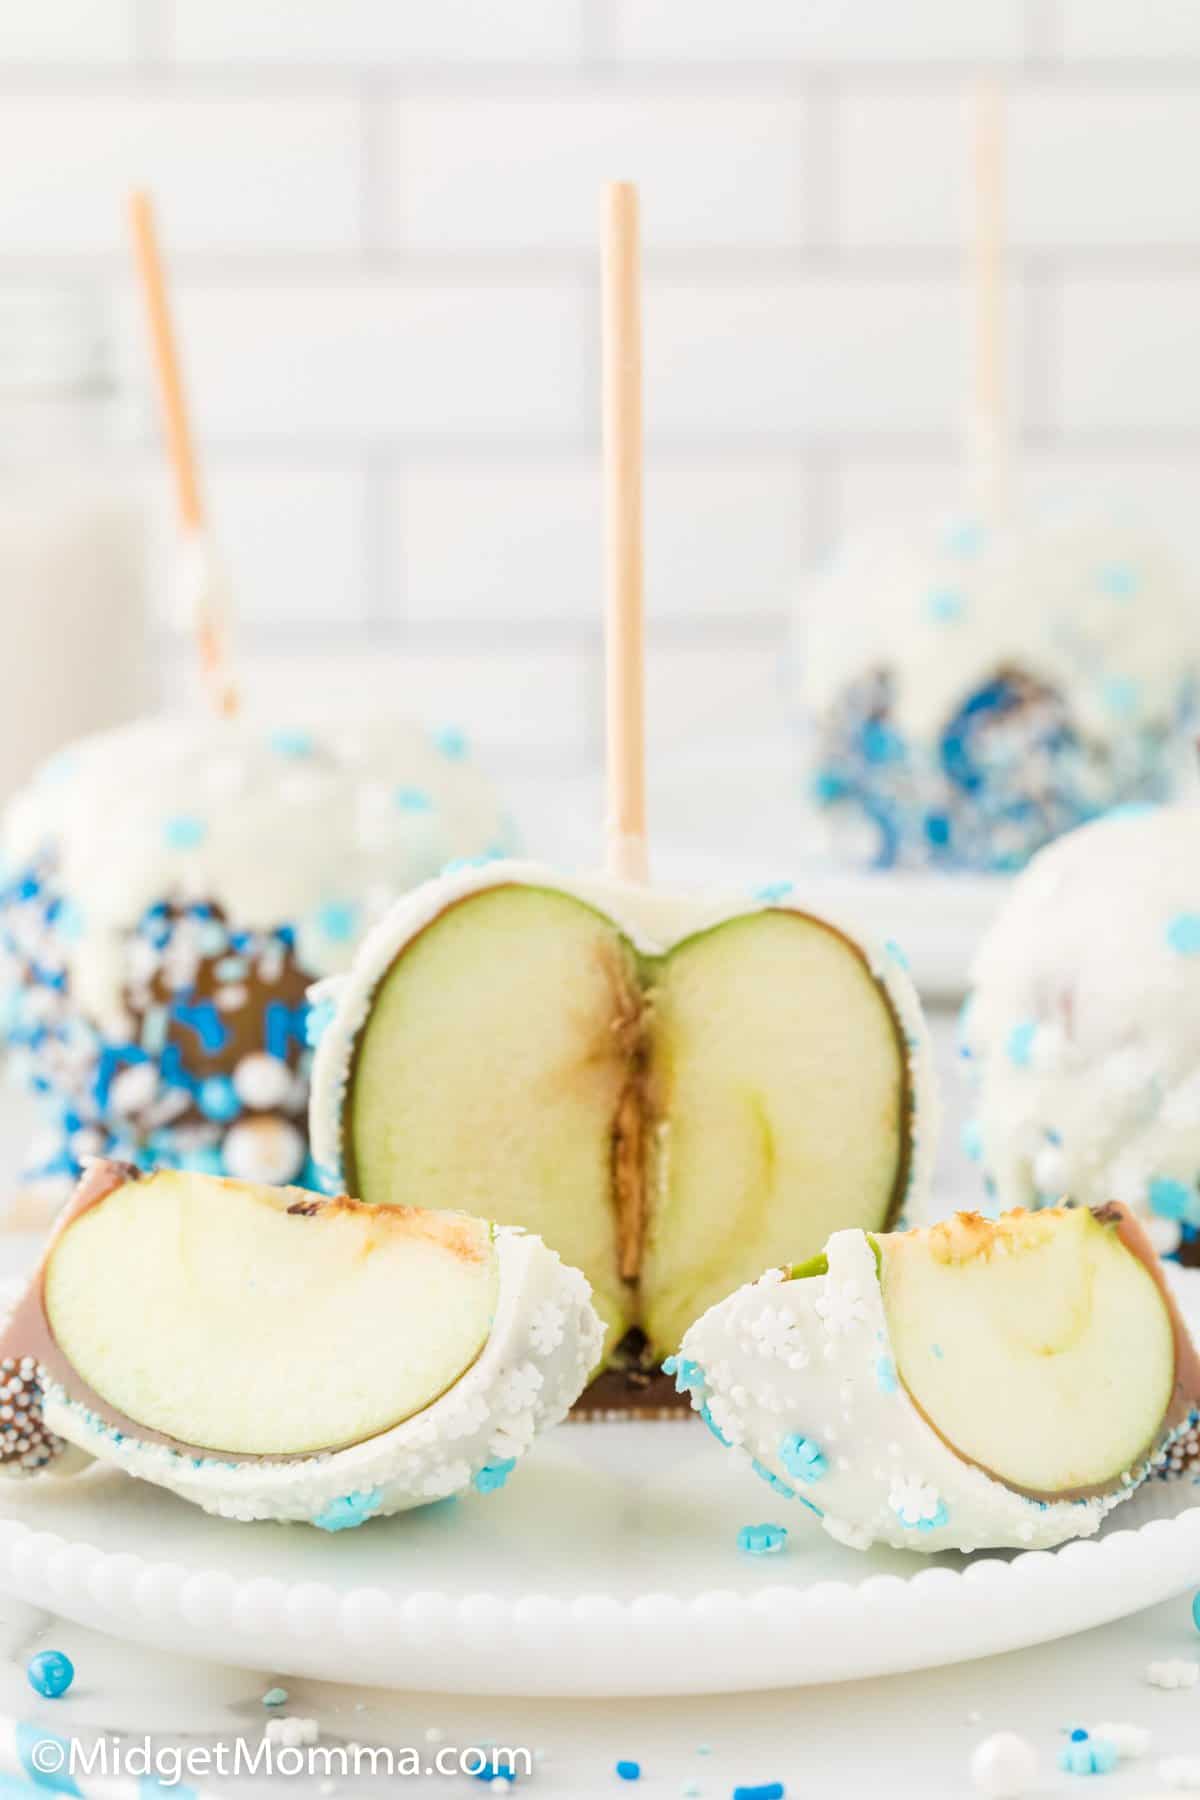 Frozen Themed White Chocolate Caramel Apples